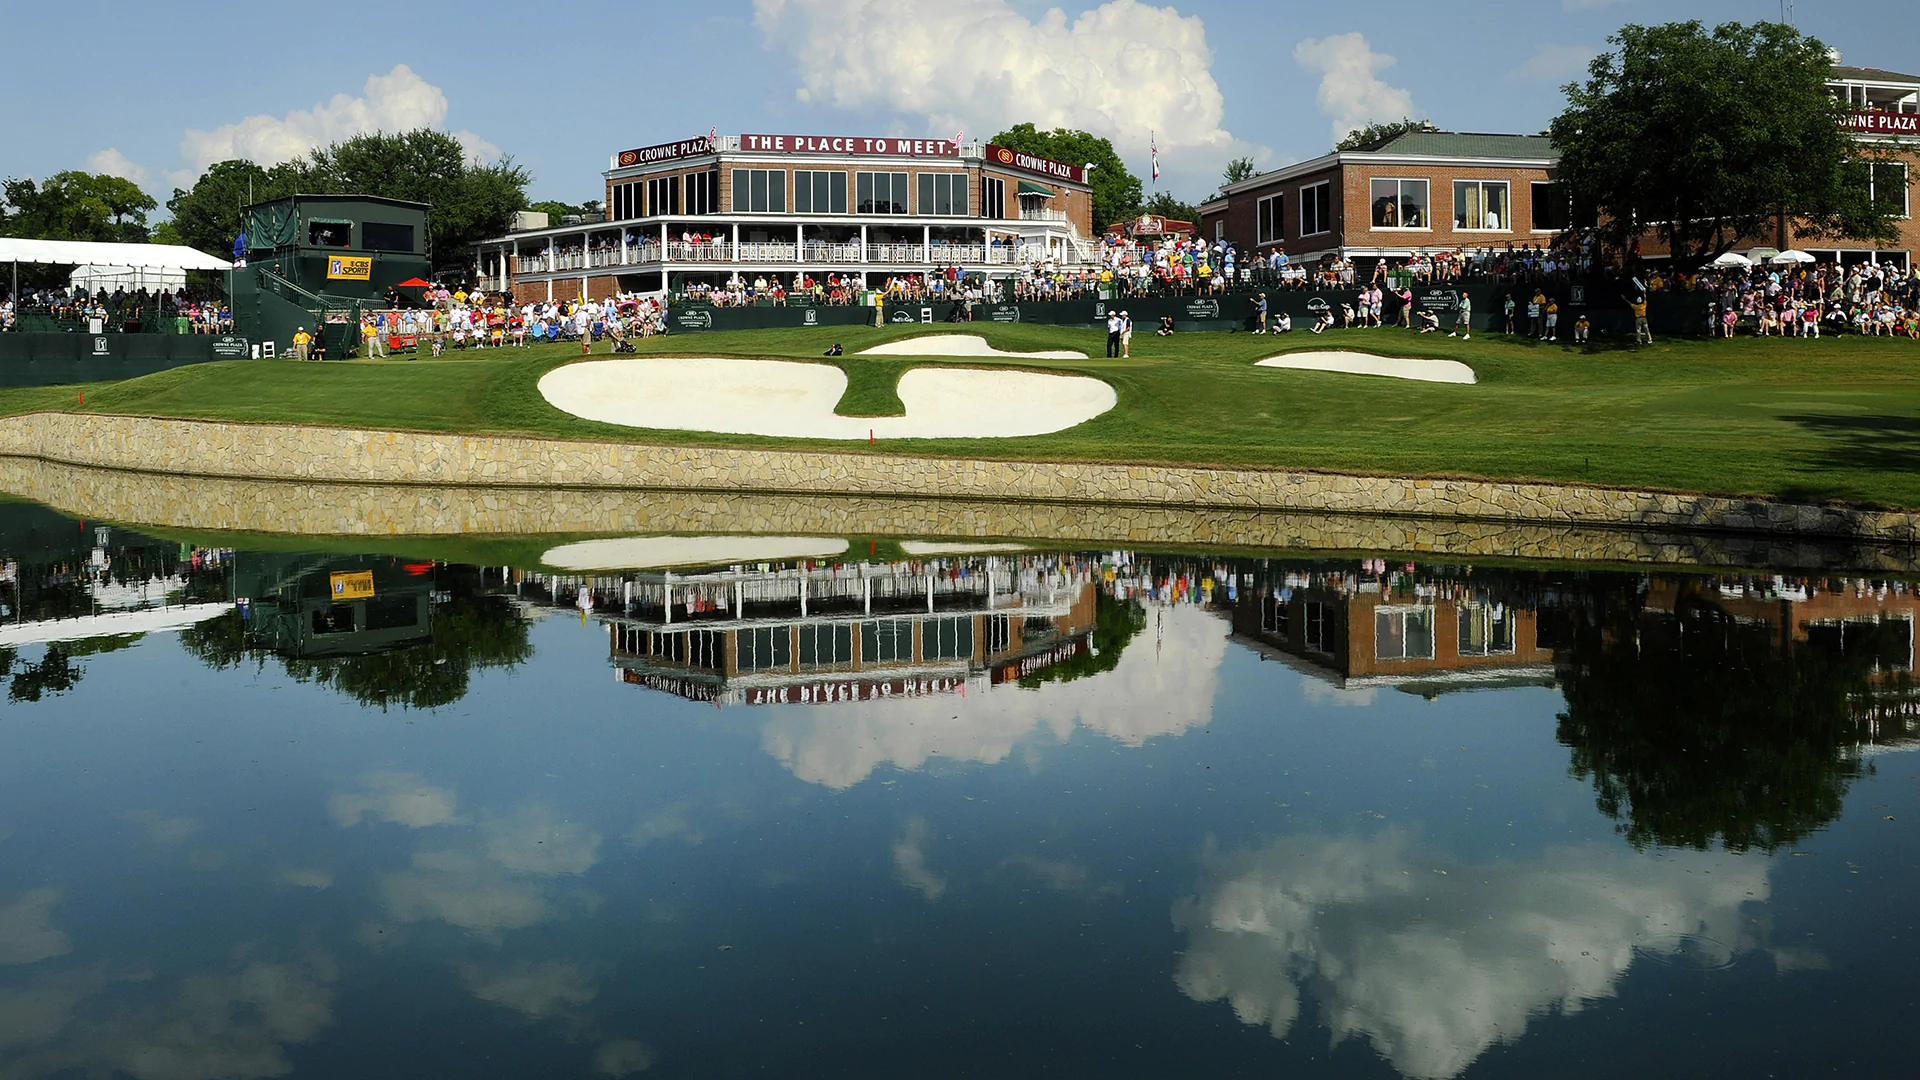 Sources confirm Charles Schwab to sponsor Colonial event